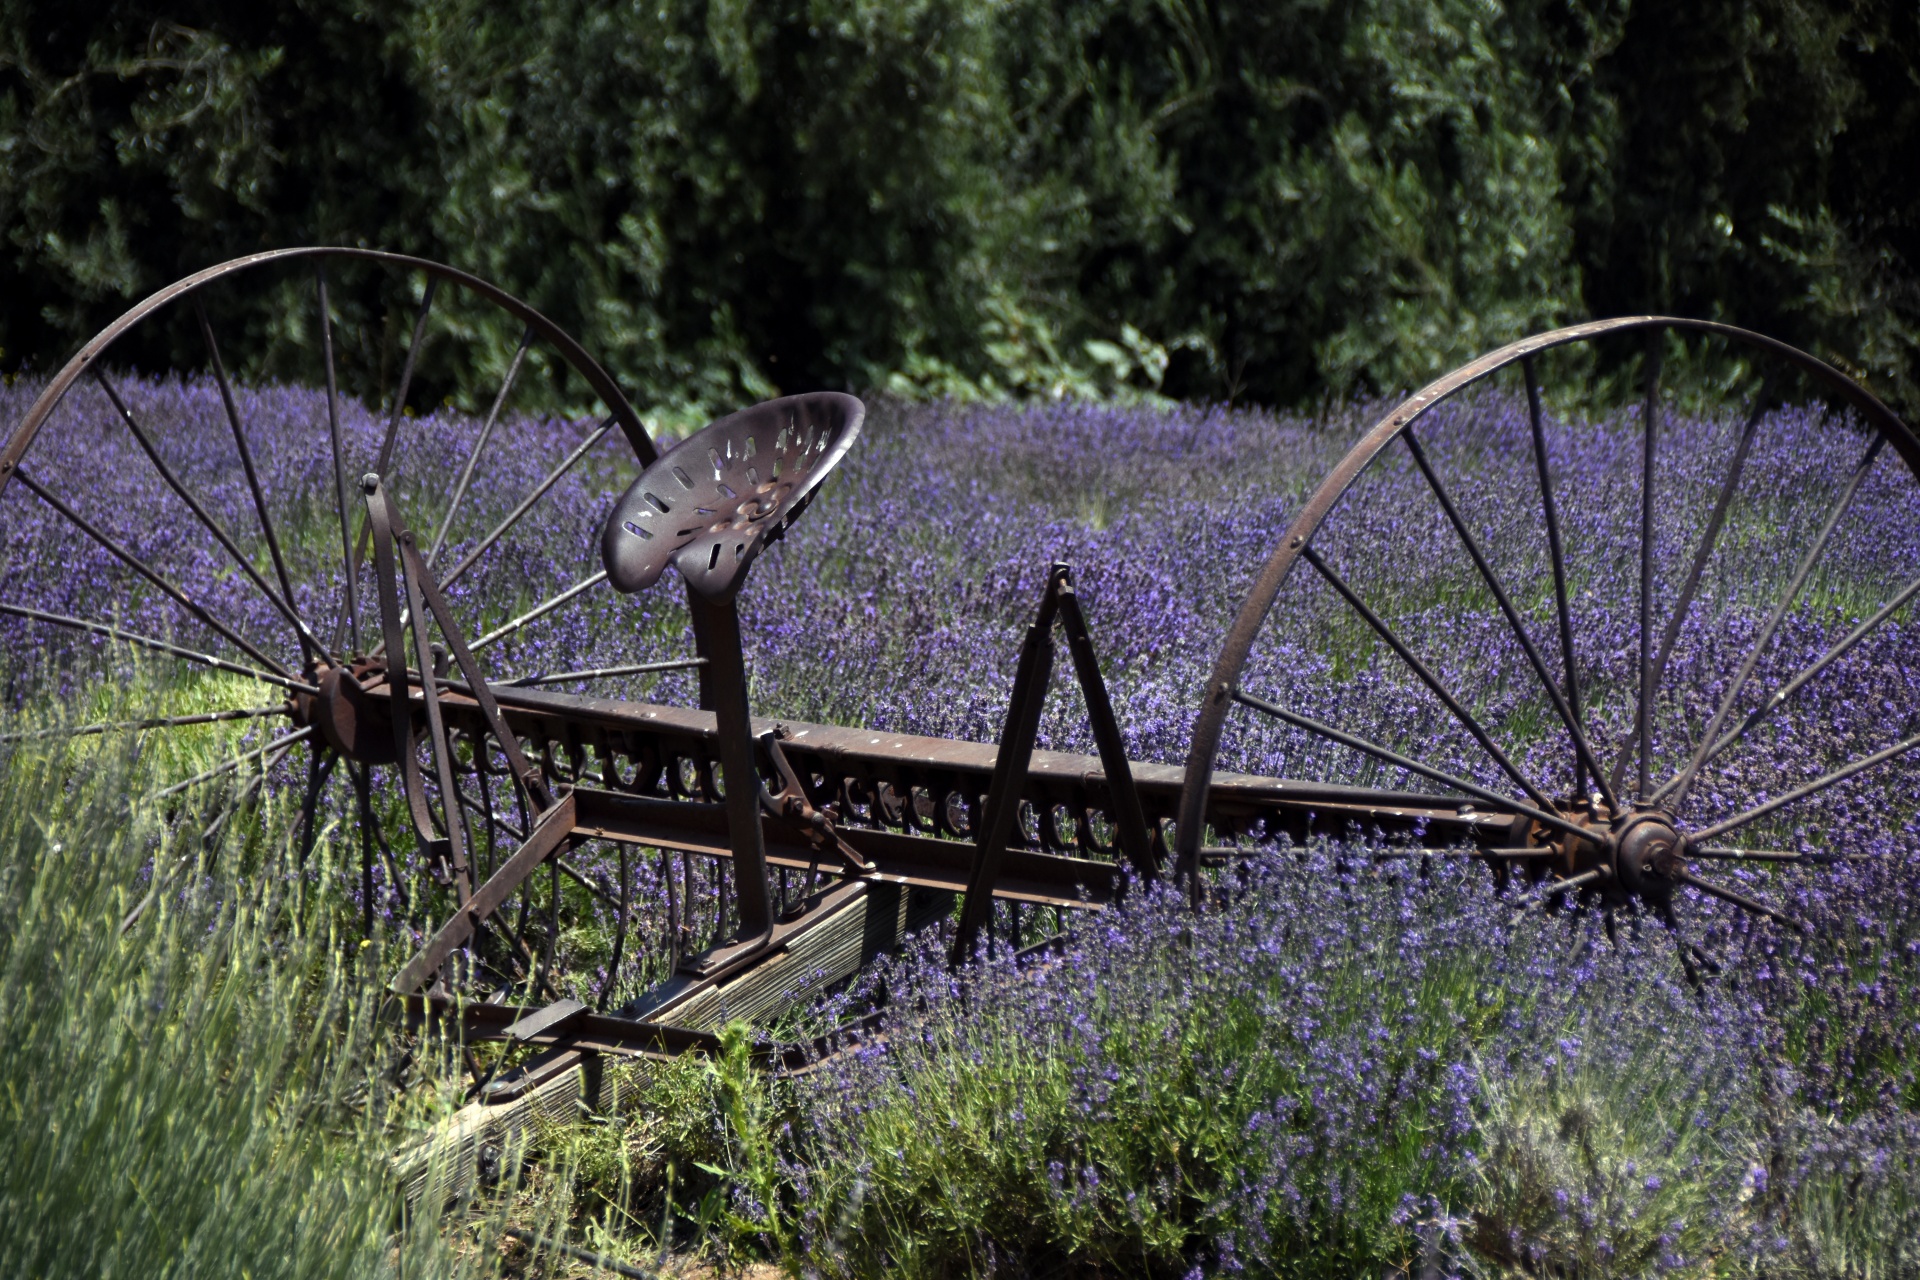 old harvesting wheel and seat of farming equipment in a field of Lavender